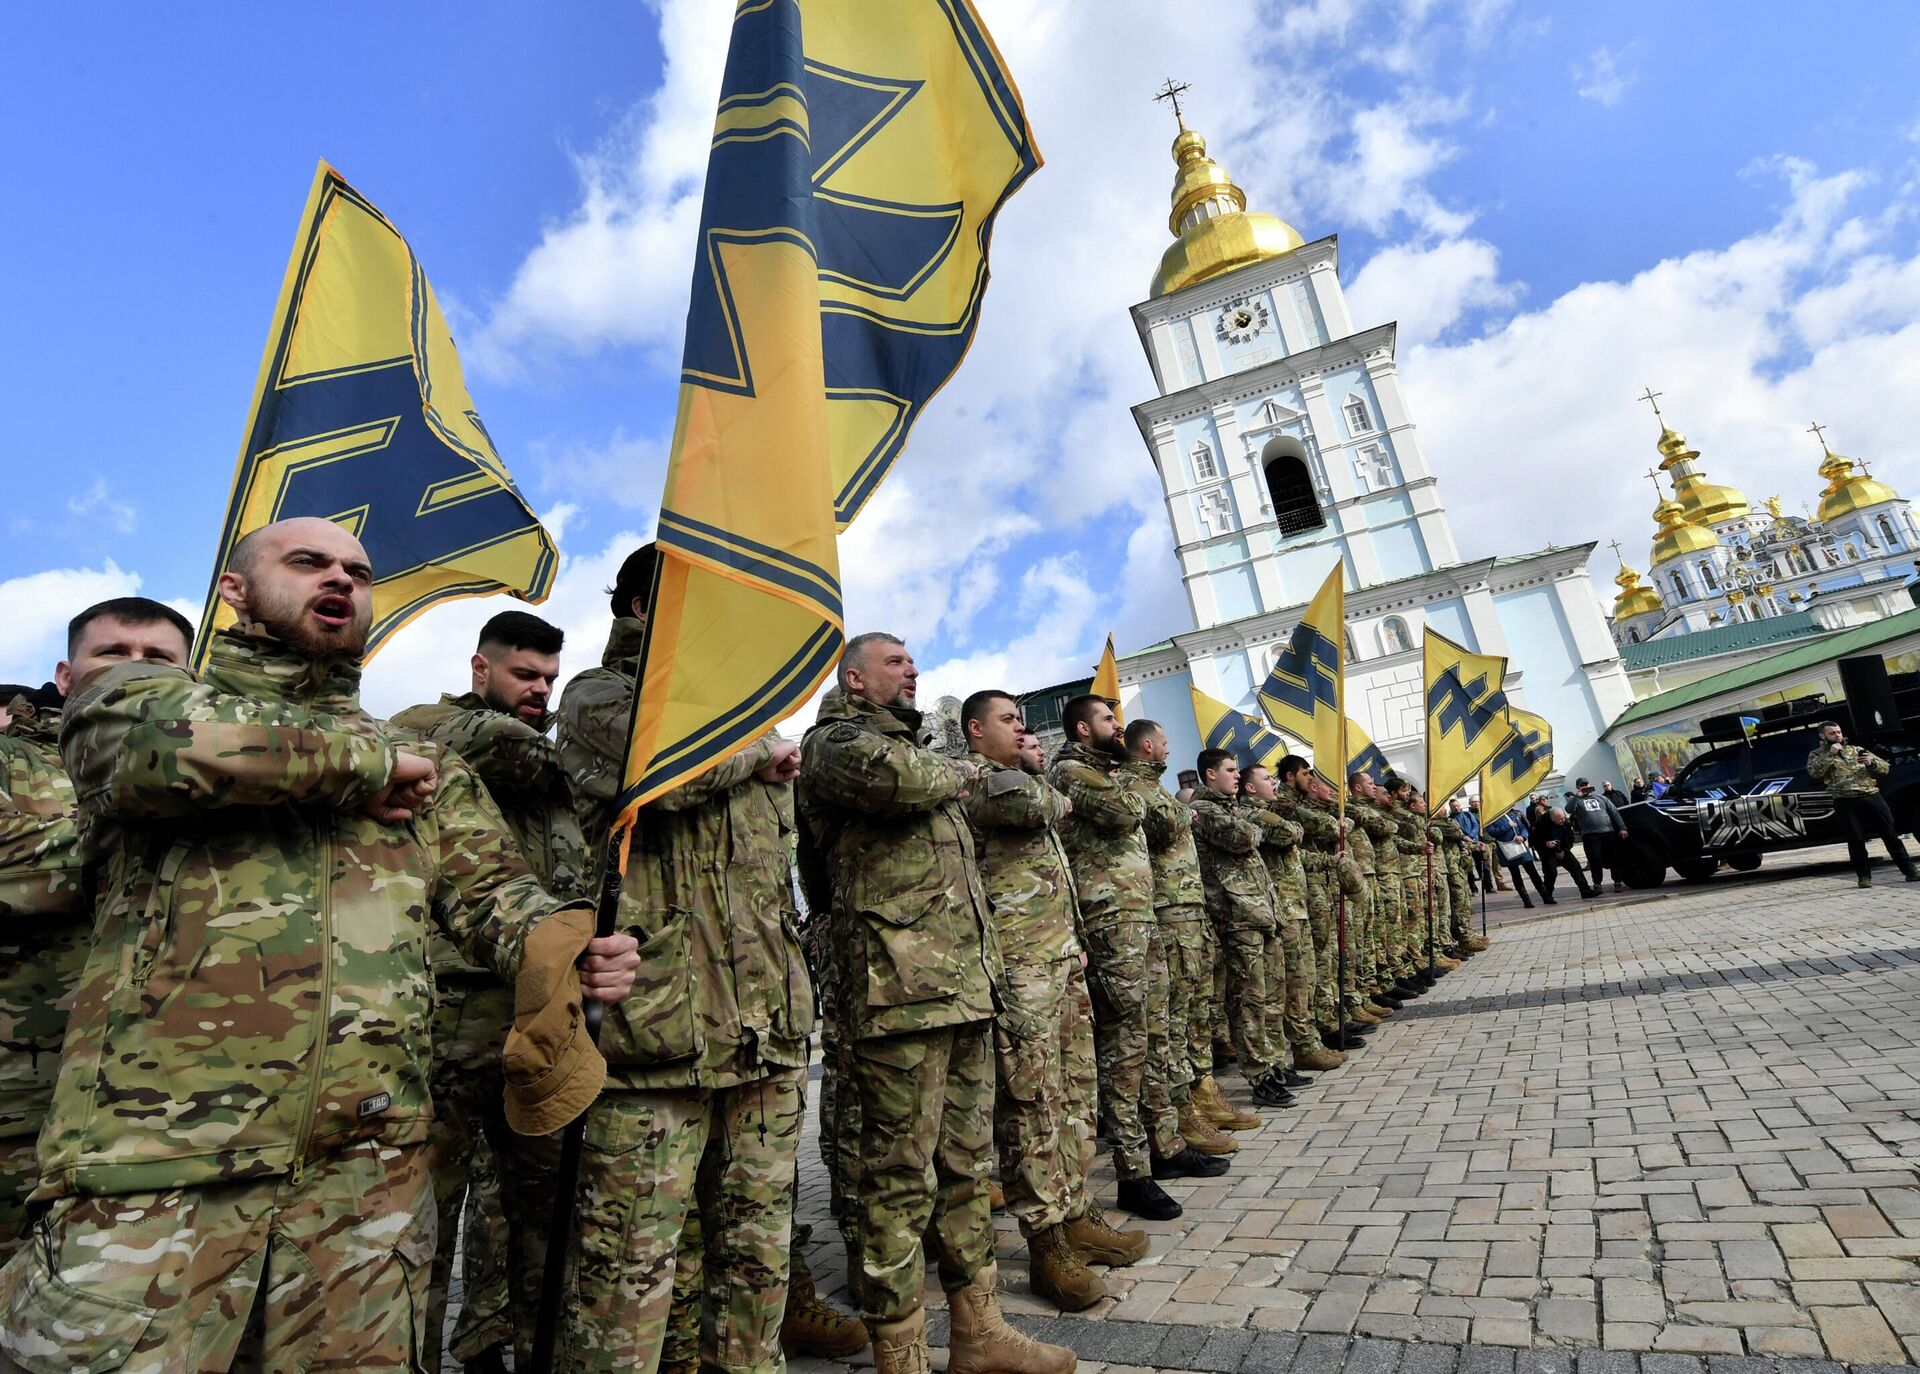 Veterans of the Azov volunteer battalion, who took part in the war in Donbass, salute during the mass rally called No surrender in Kiev on March 14, 2020. - Around fifteen thousands participants rallied despite the ban on holding mass events because of the coronavirus, demanding President Zelensky's resignation. (Photo by Sergei SUPINSKY / AFP) - Sputnik International, 1920, 20.04.2022